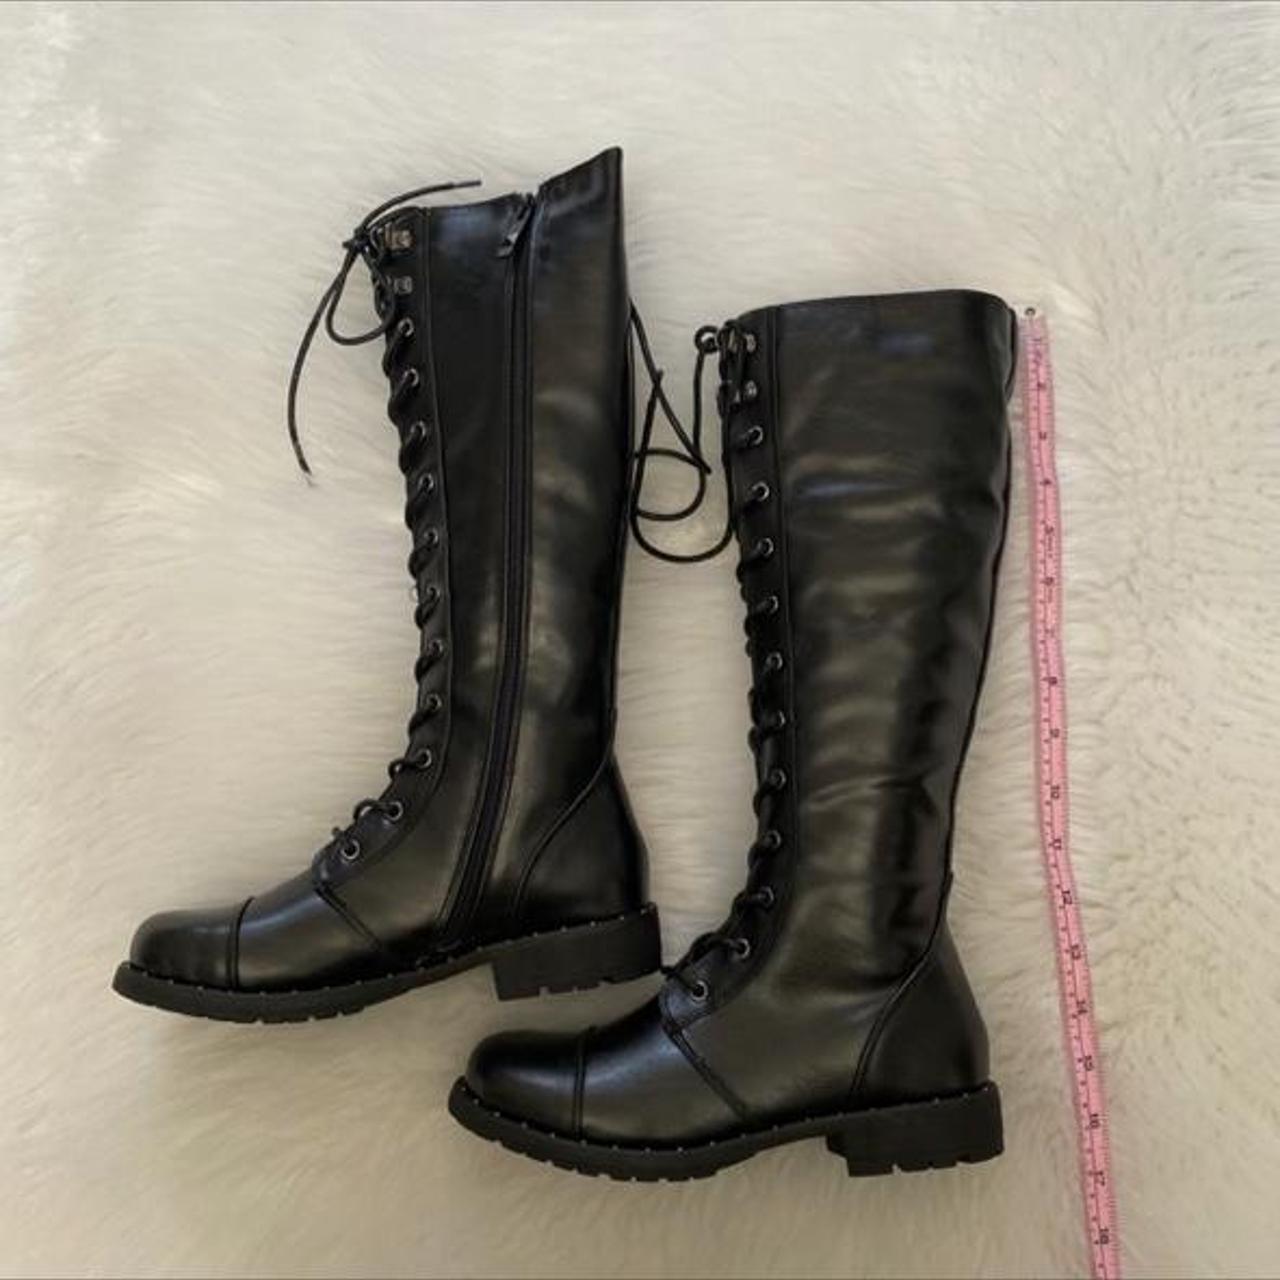 Dirty Laundry Women's Black Boots (2)